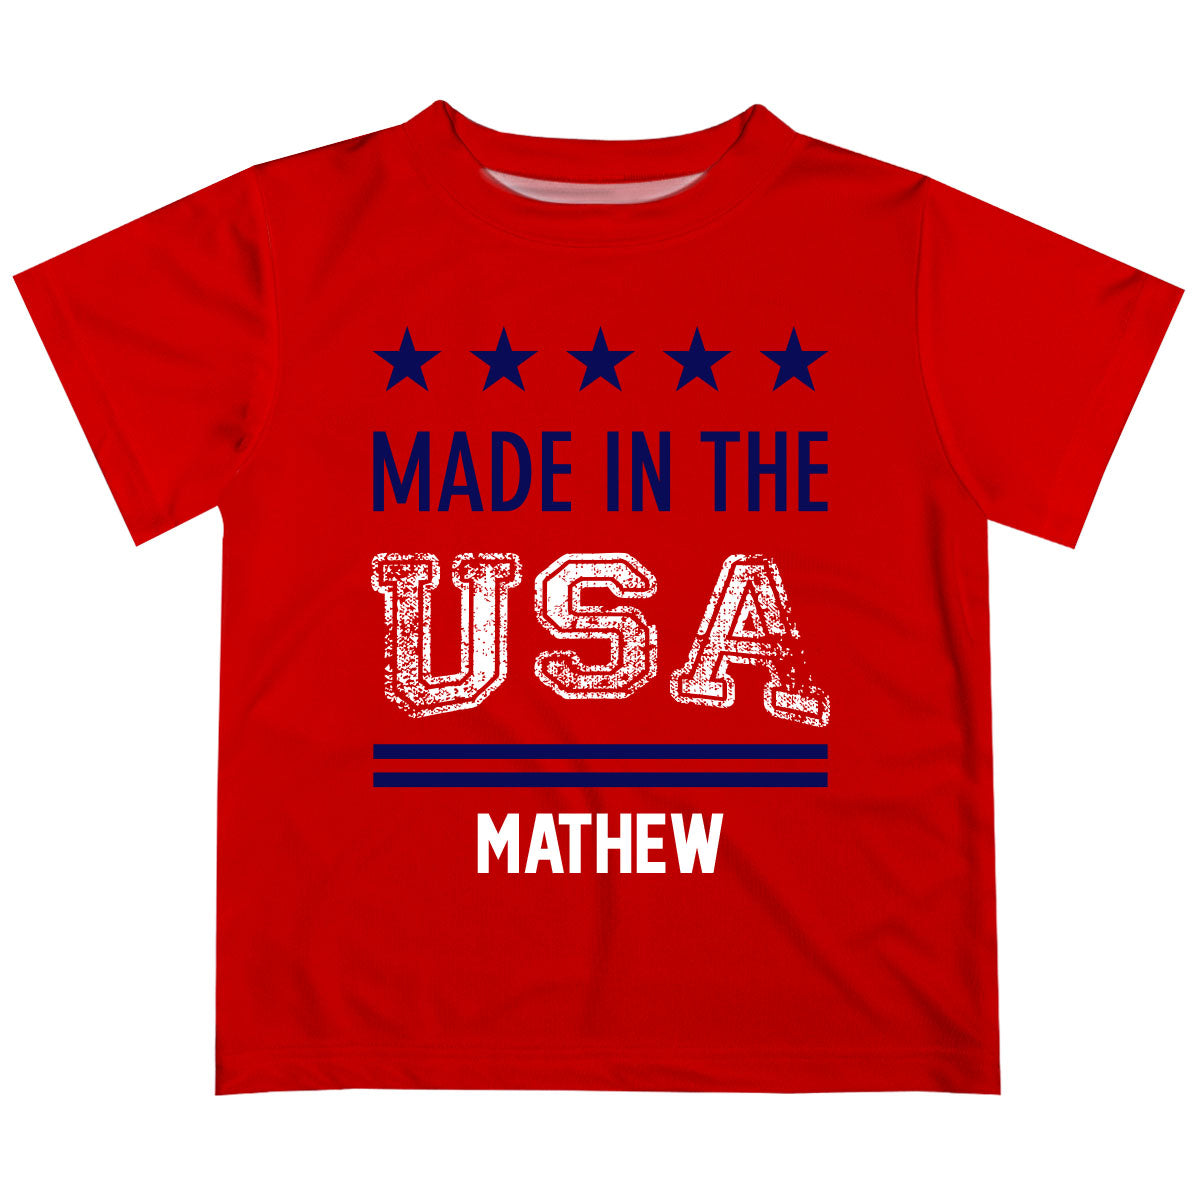 Made In The USA Name Red Short Sleeve Tee Shirt